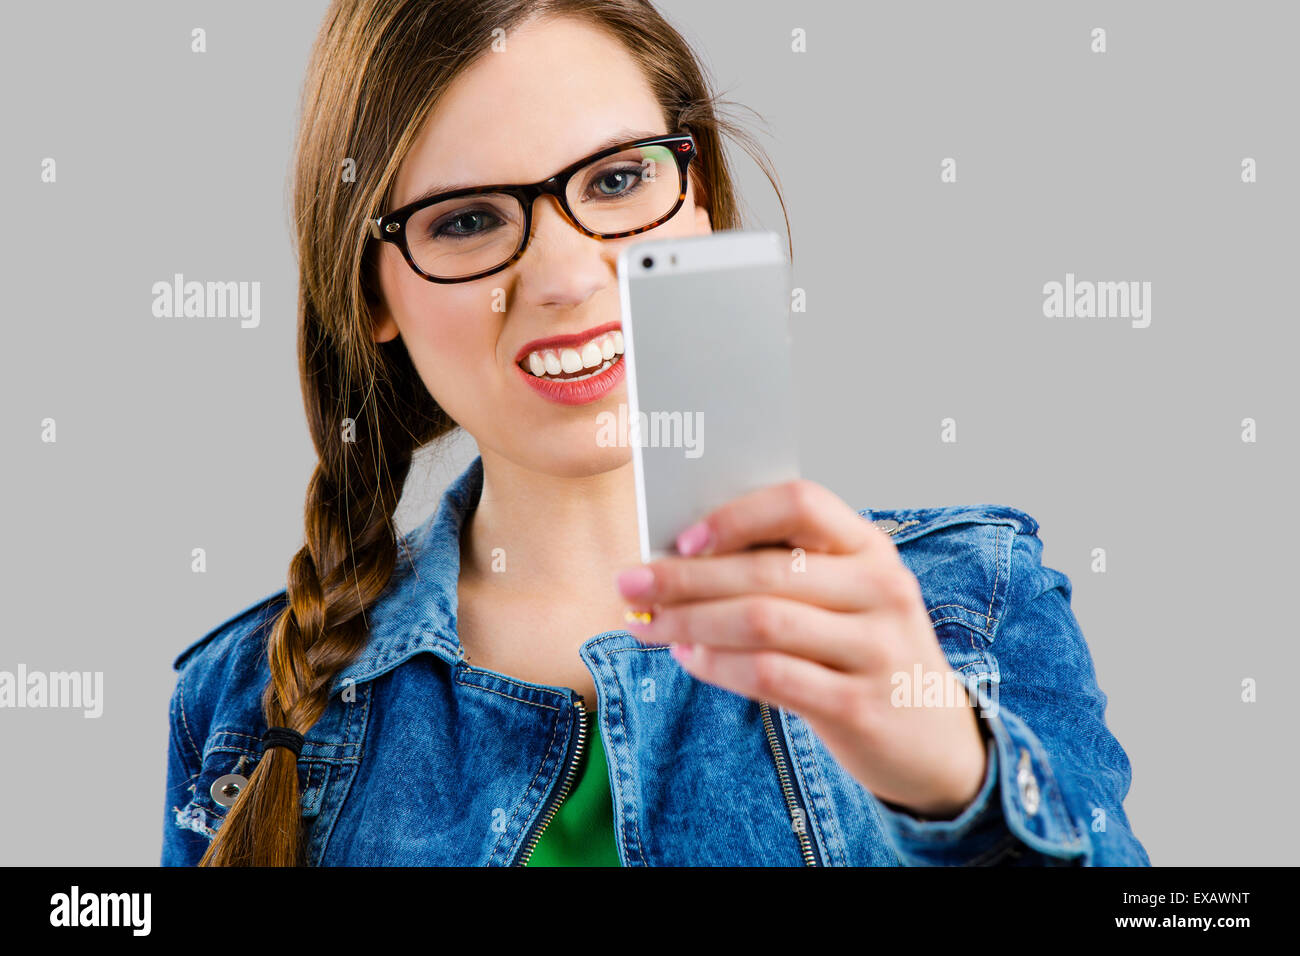 Beautiful woman taking a selfie and making a ugly face, isolated over a grey background Stock Photo